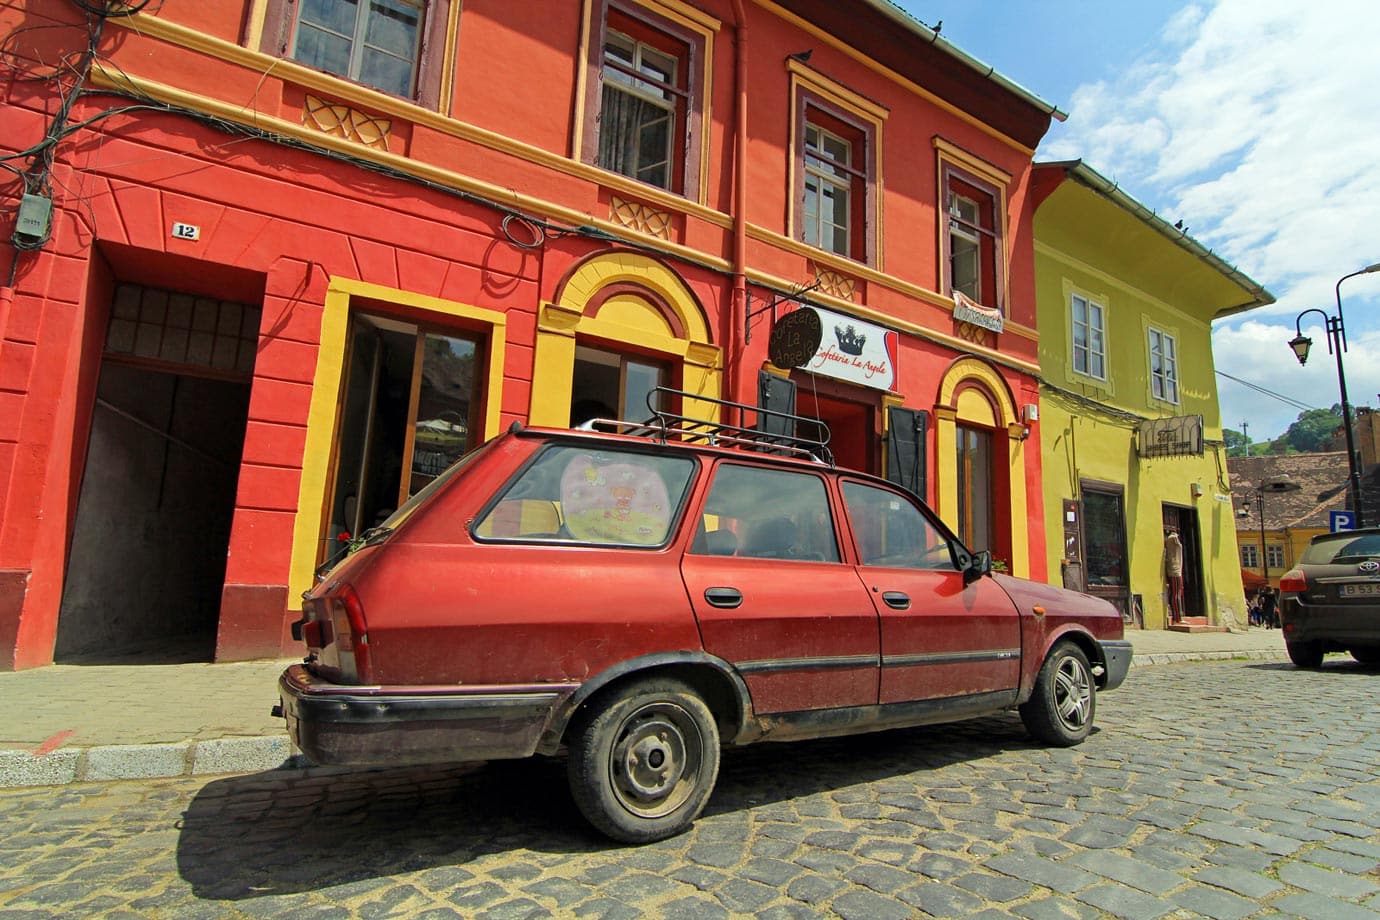 The colours of Sighisoara